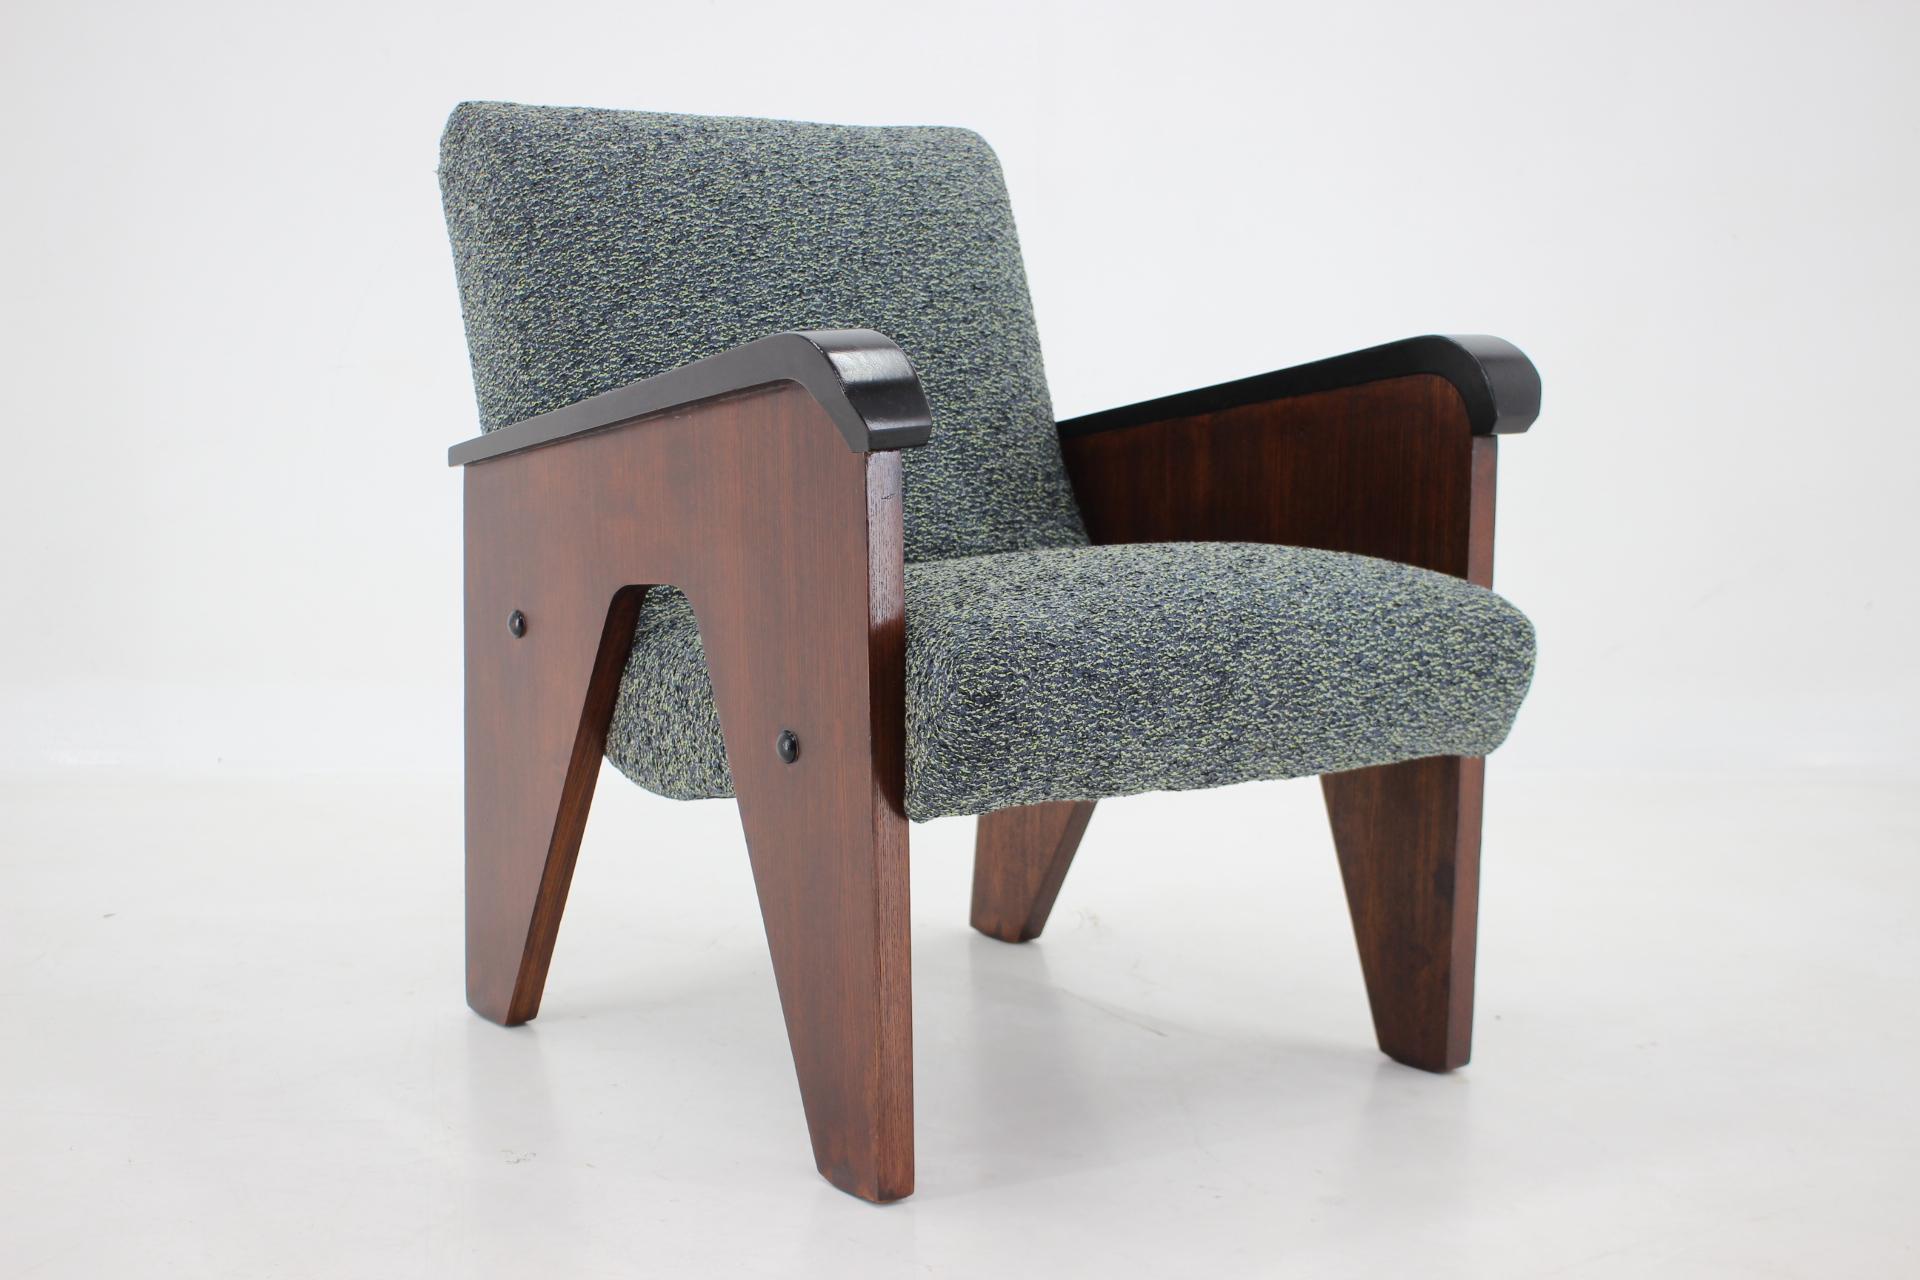 - Newly Upholstered In quality 100% recycled KIRGBY fabric named SPIRAL.
- Wooden parts have been refurbished.